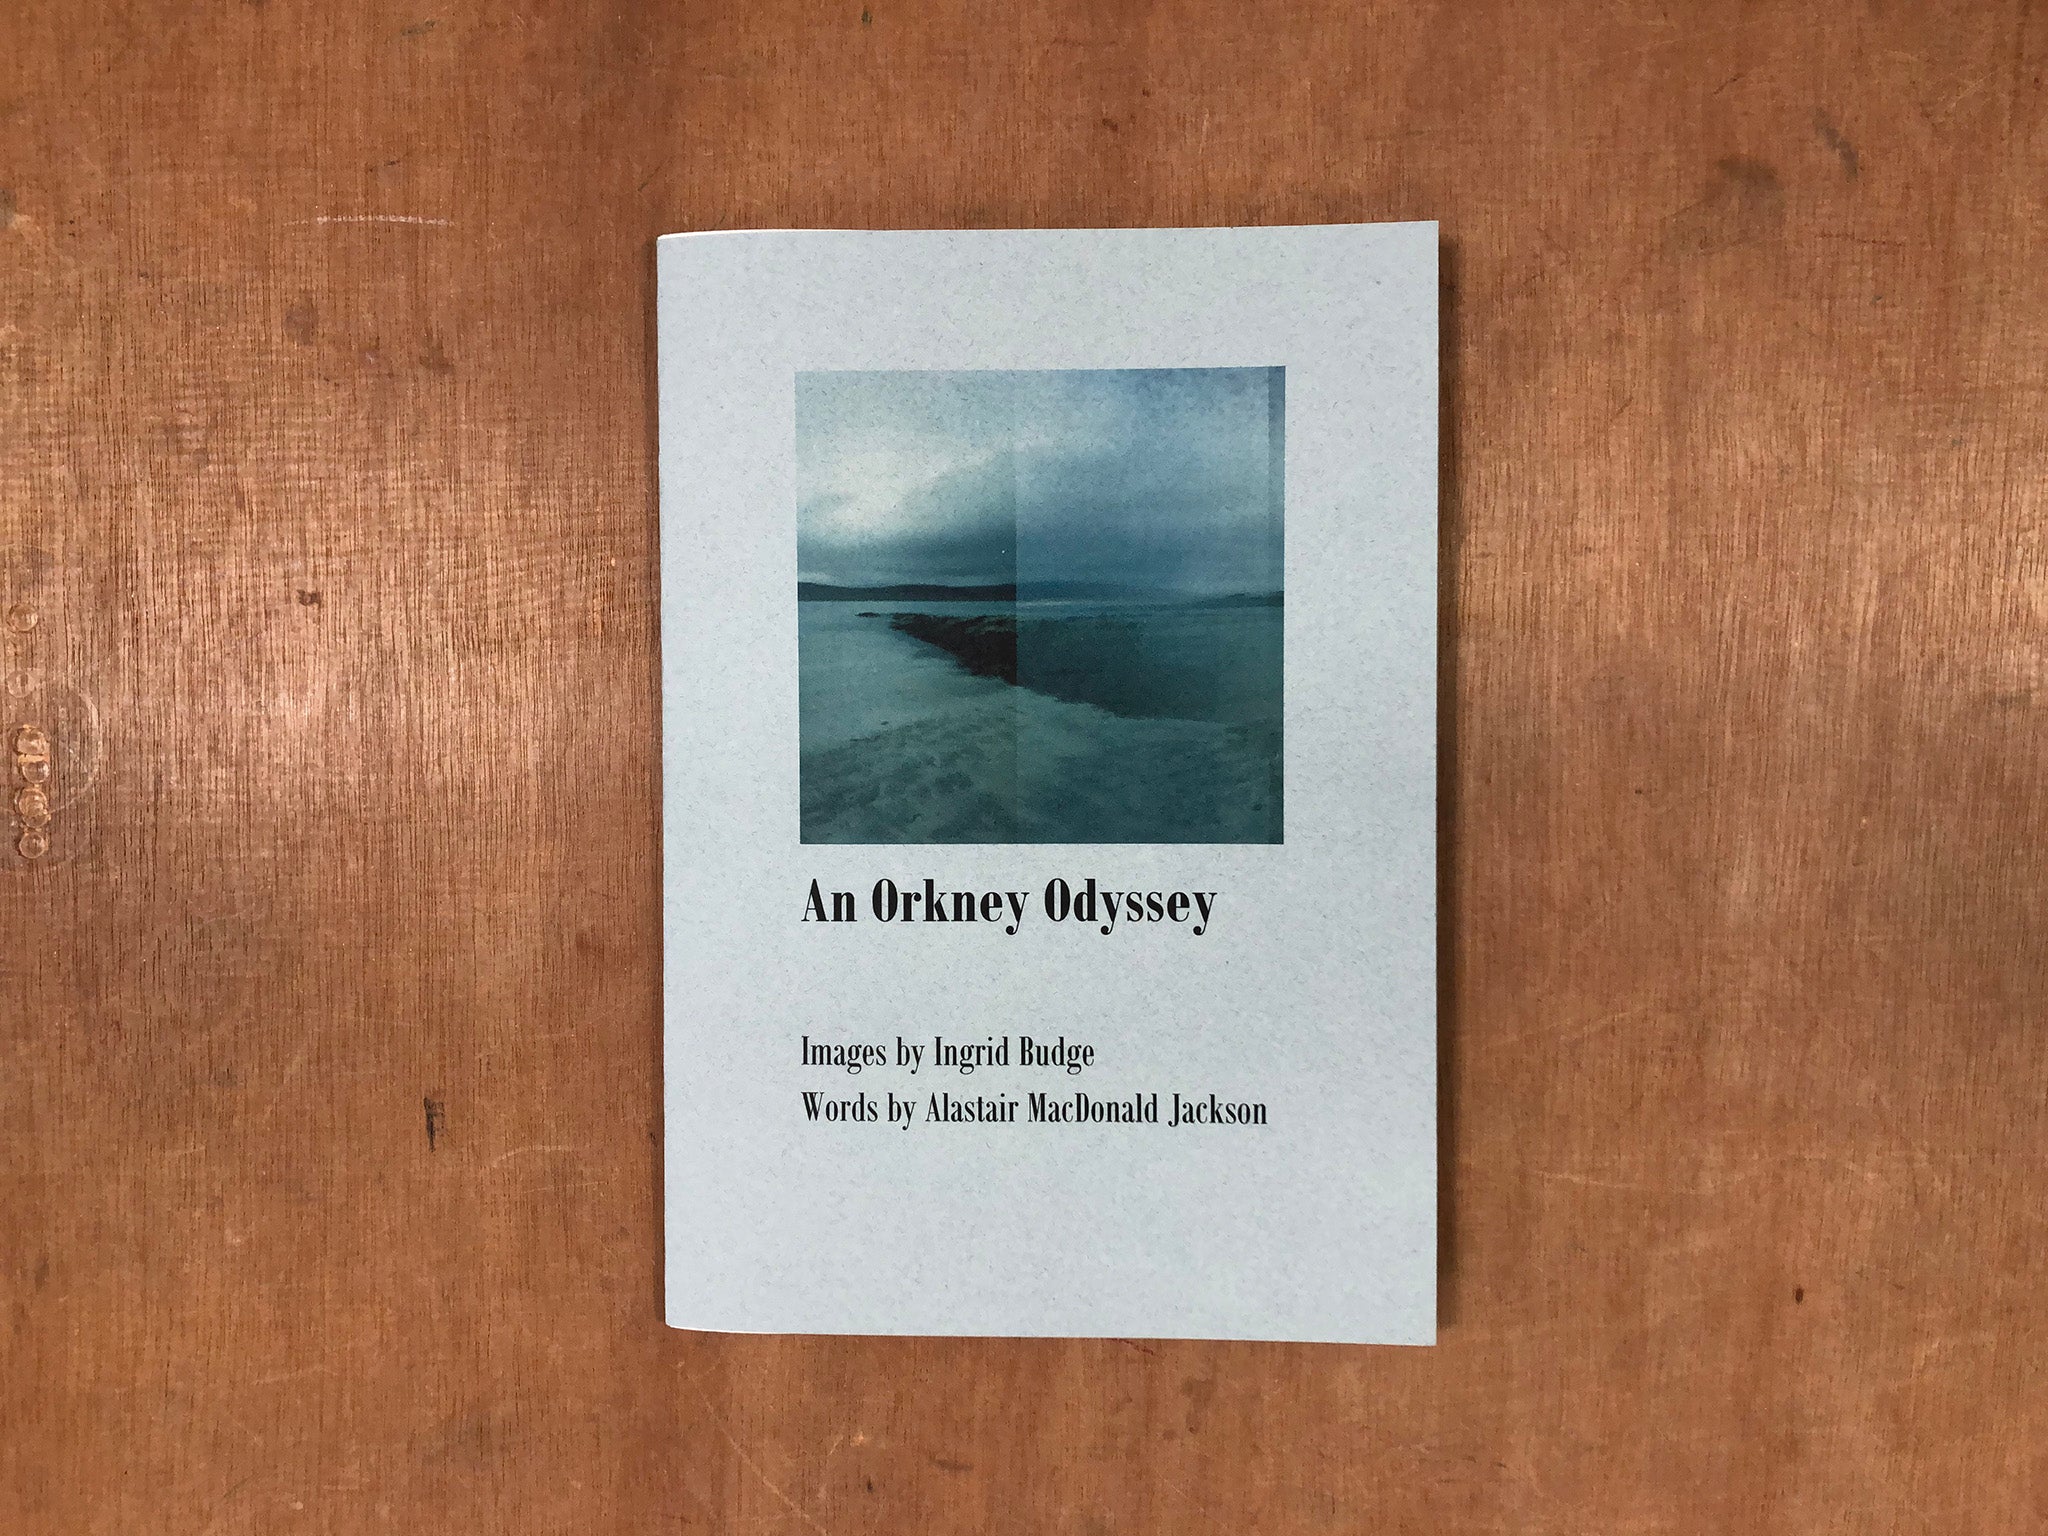 AN ORKNEY ODYSSEY by Ingrid Budge and Alastair MacDonald Jackson